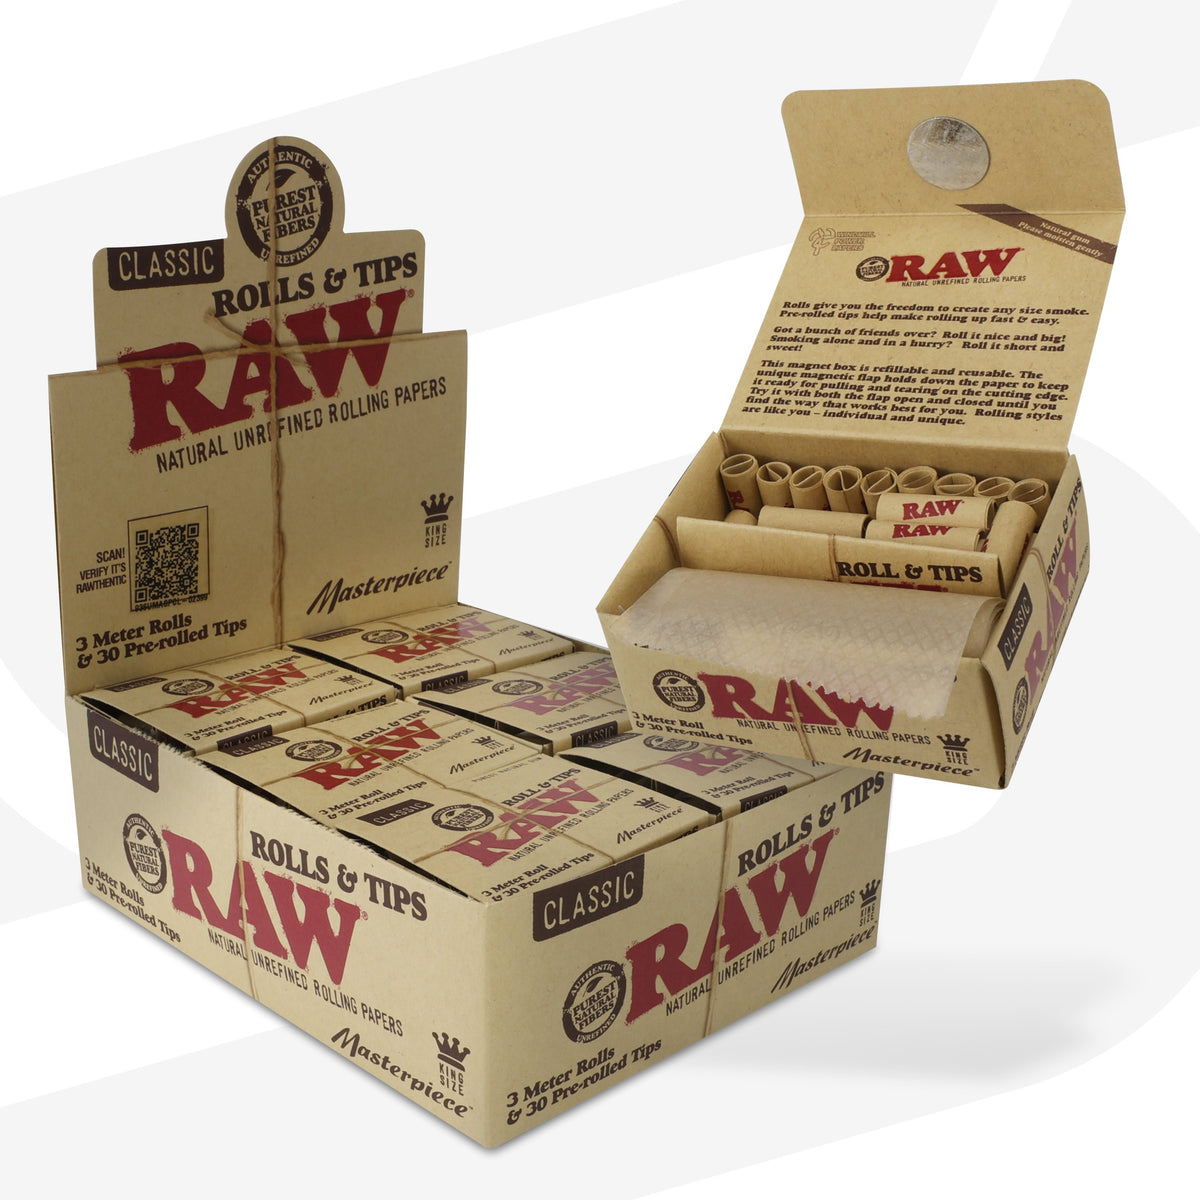 RAW Classic Masterpiece Rolls - 3 Meters Rolling Papers WAR00304-MUSA01 esd-official